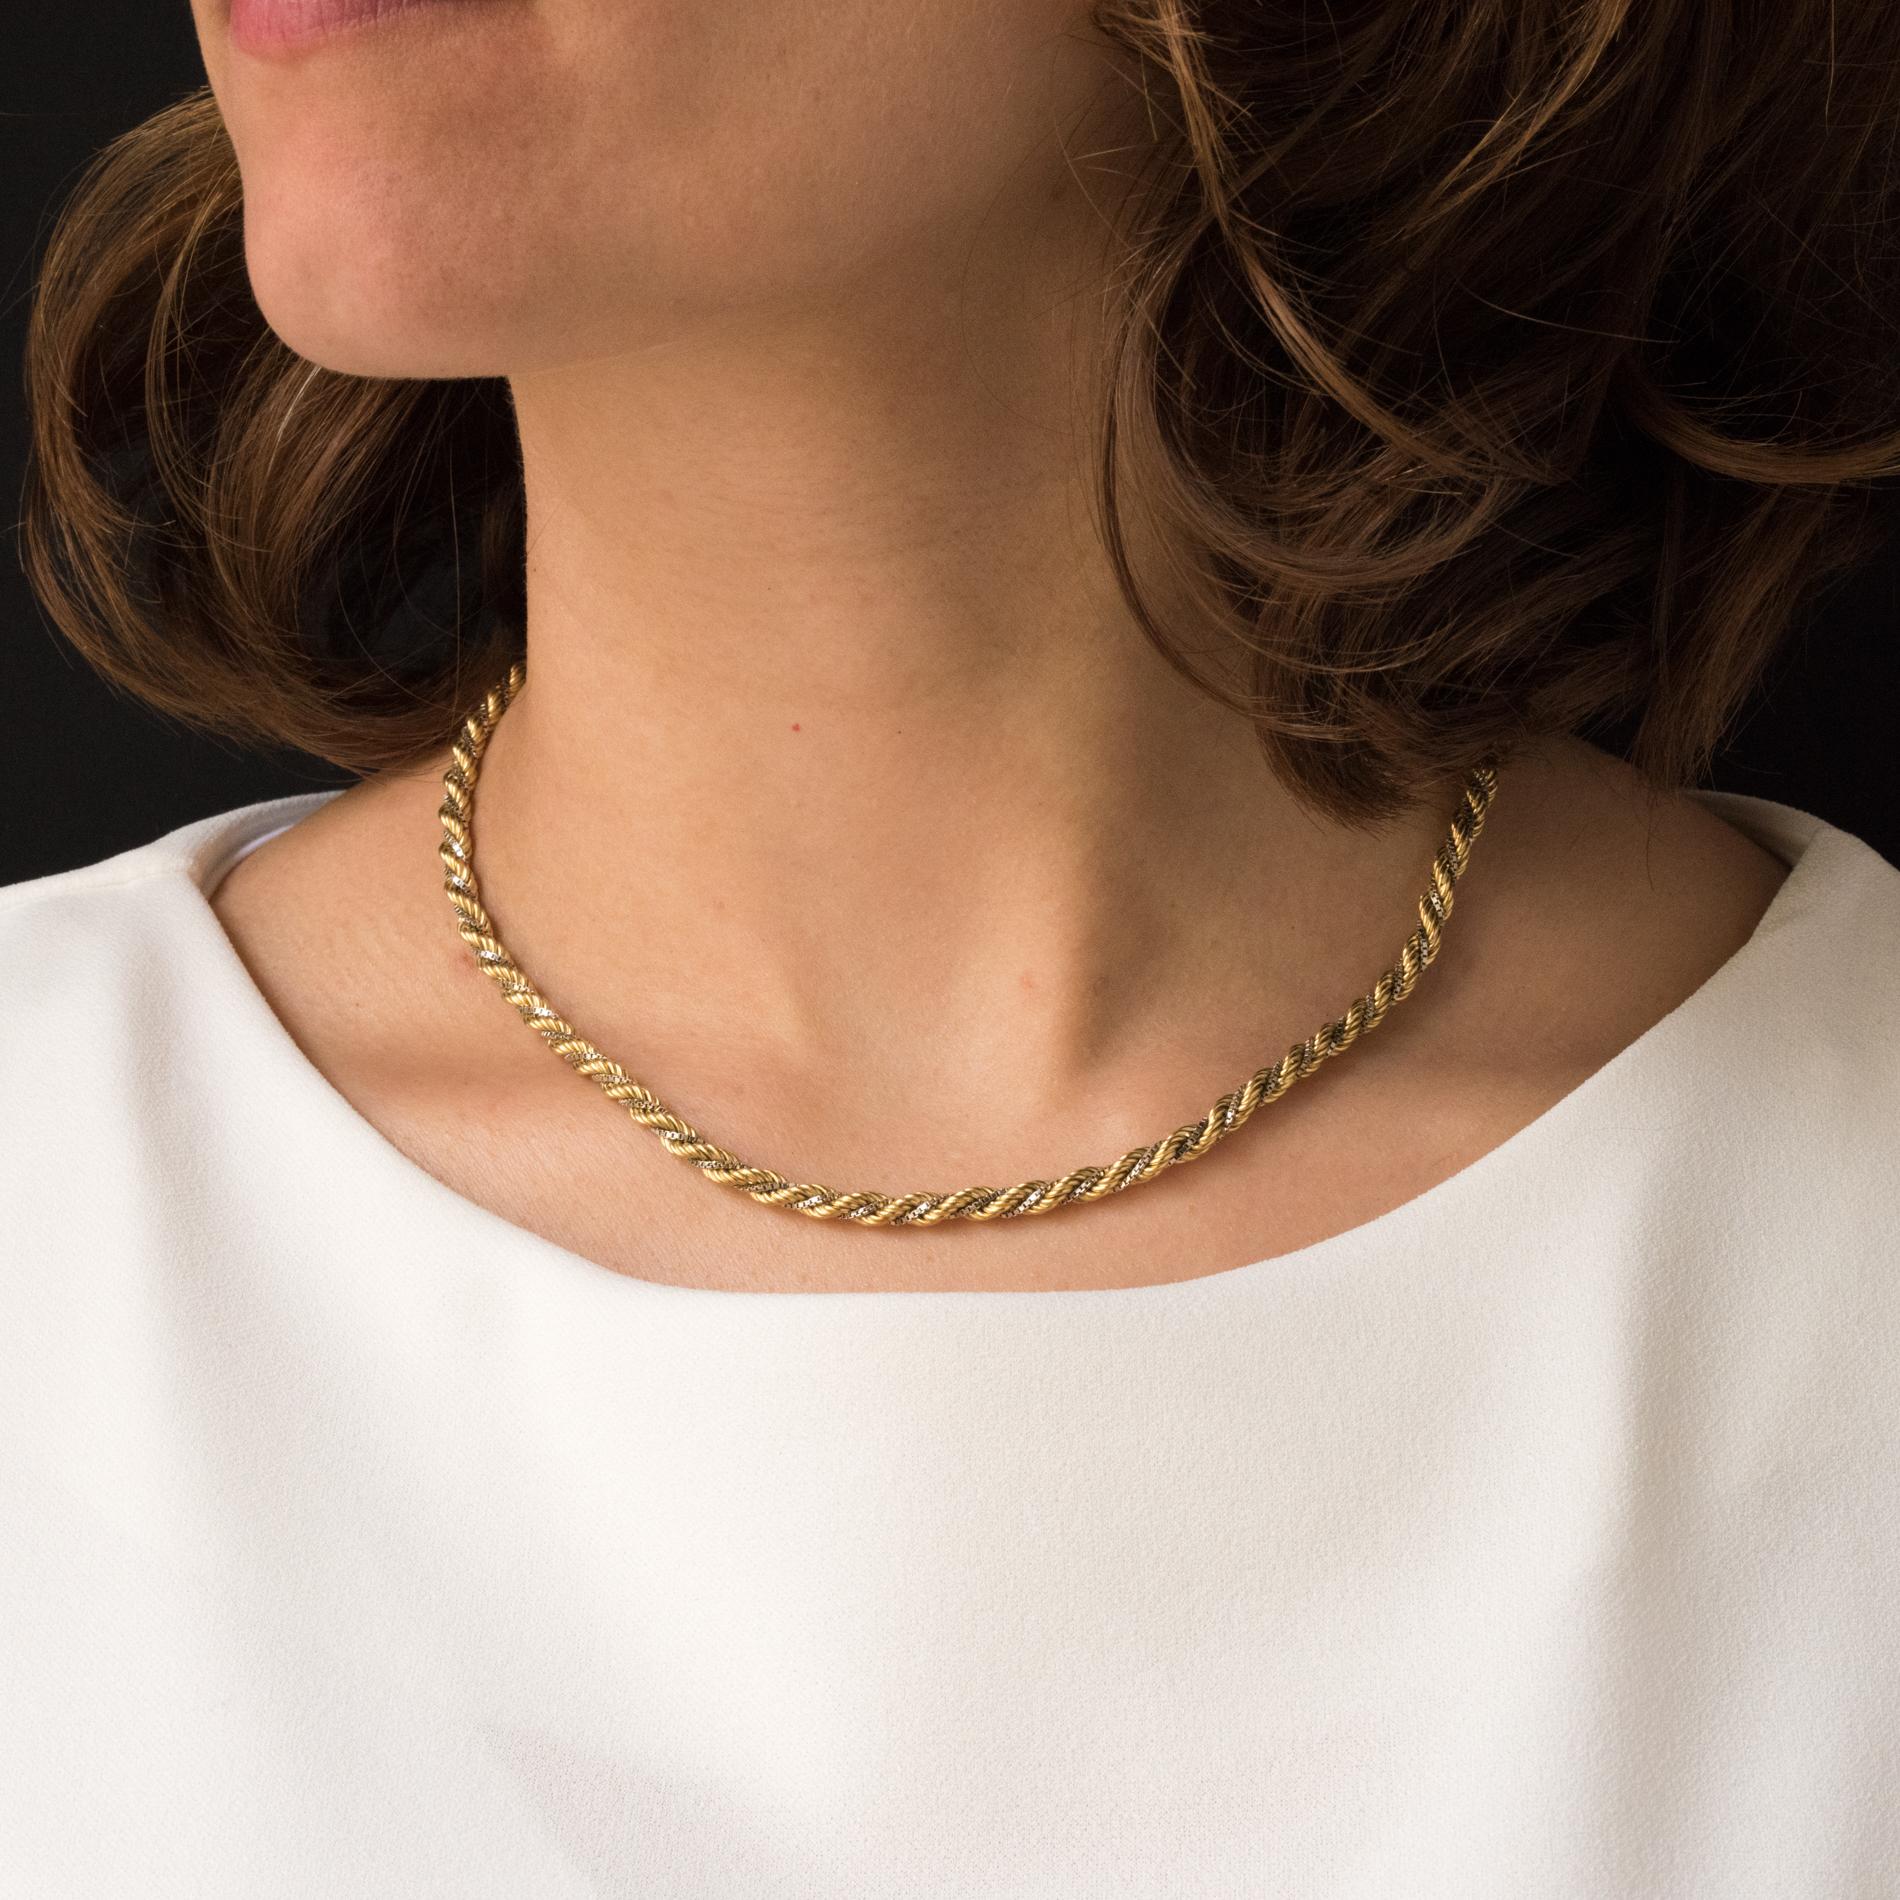 Necklace in 18 karats yellow and white gold, weevil hallmark.
This necklace is made of a twist of yellow gold thread and a white gold cube mesh chain. The clasp is a carabiner with safety chain.
Length: 42.5 cm, thickness: 0.4 cm.
Total weight of